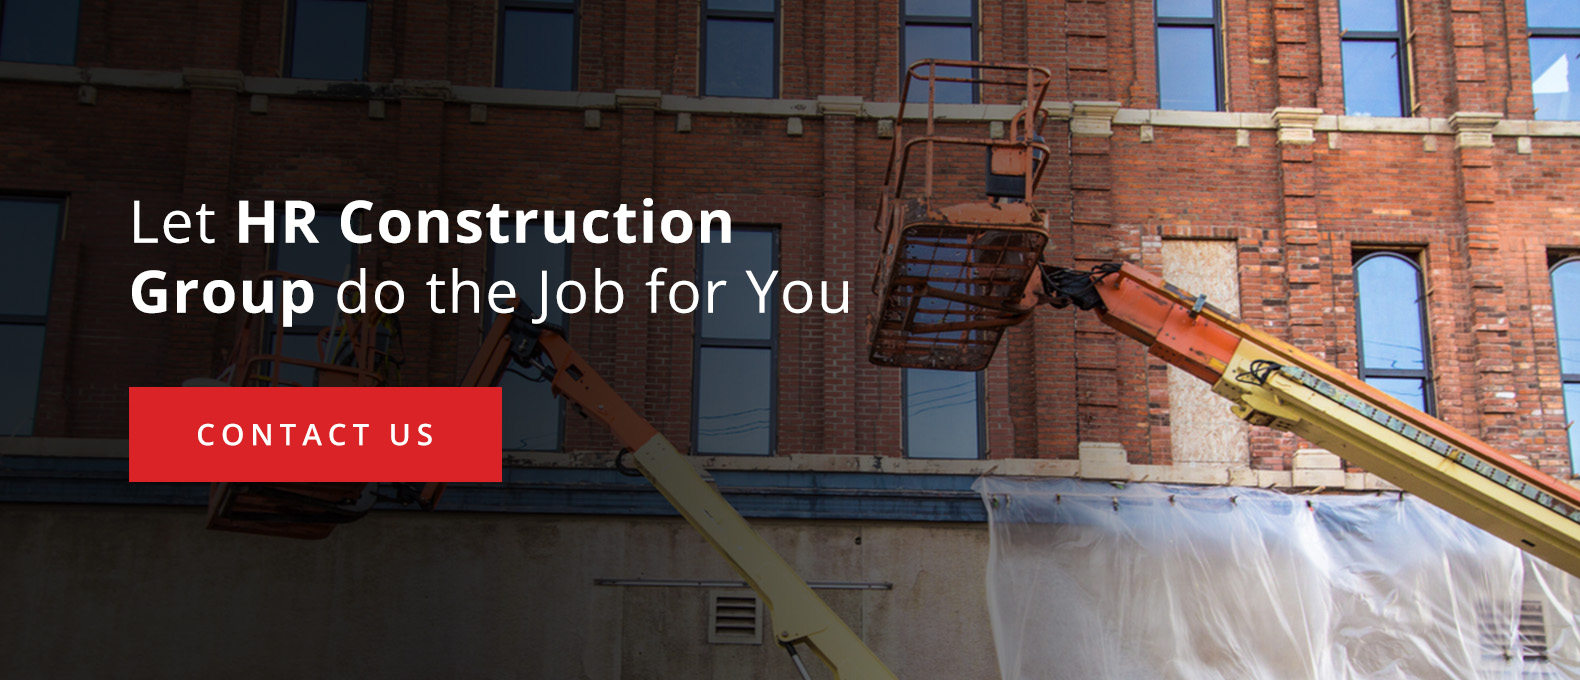 Let HR Construction Group do the Job for You